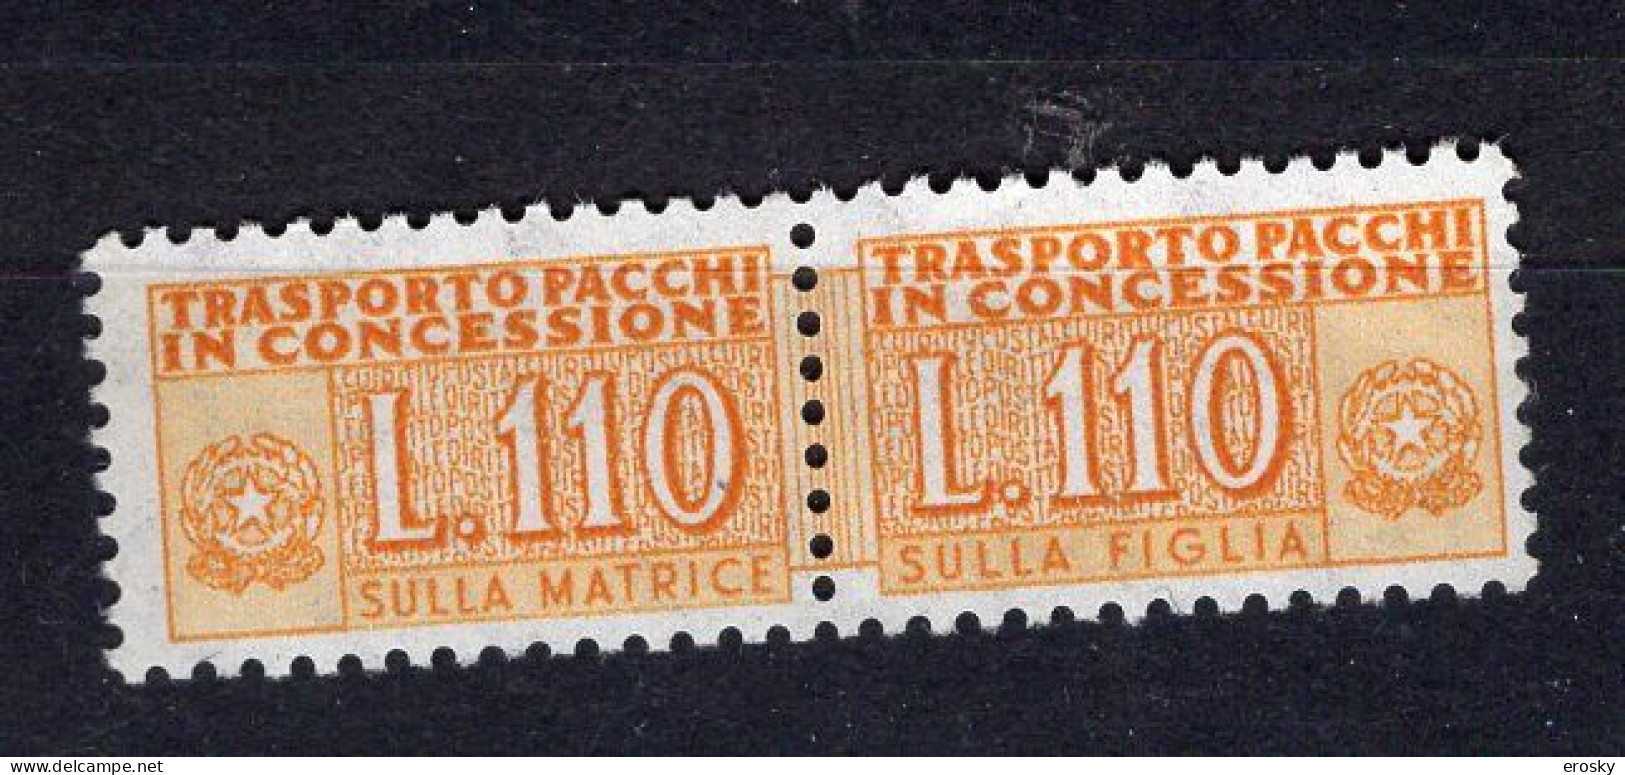 Y6269 - ITALIA PACCHI CONCESSIONE Ss N°13 - ITALIE COLIS Yv N°98 ** - Consigned Parcels